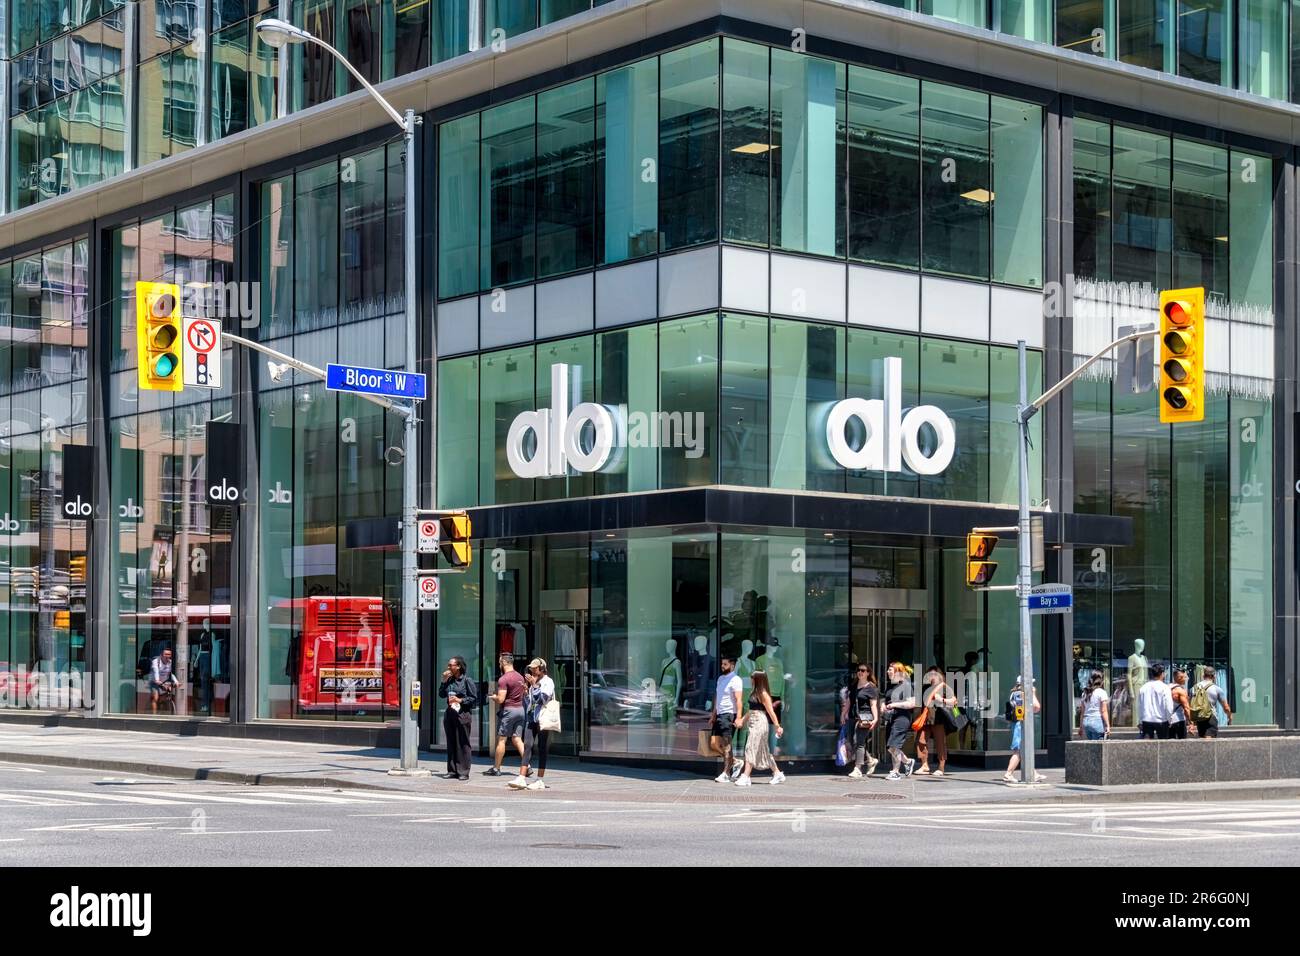 Toronto, Canada - June 4, 2023: Groups of people walking on a sidewalk alongside a building with a glass wall. The name 'Alo Alo' is prominently displ Stock Photo